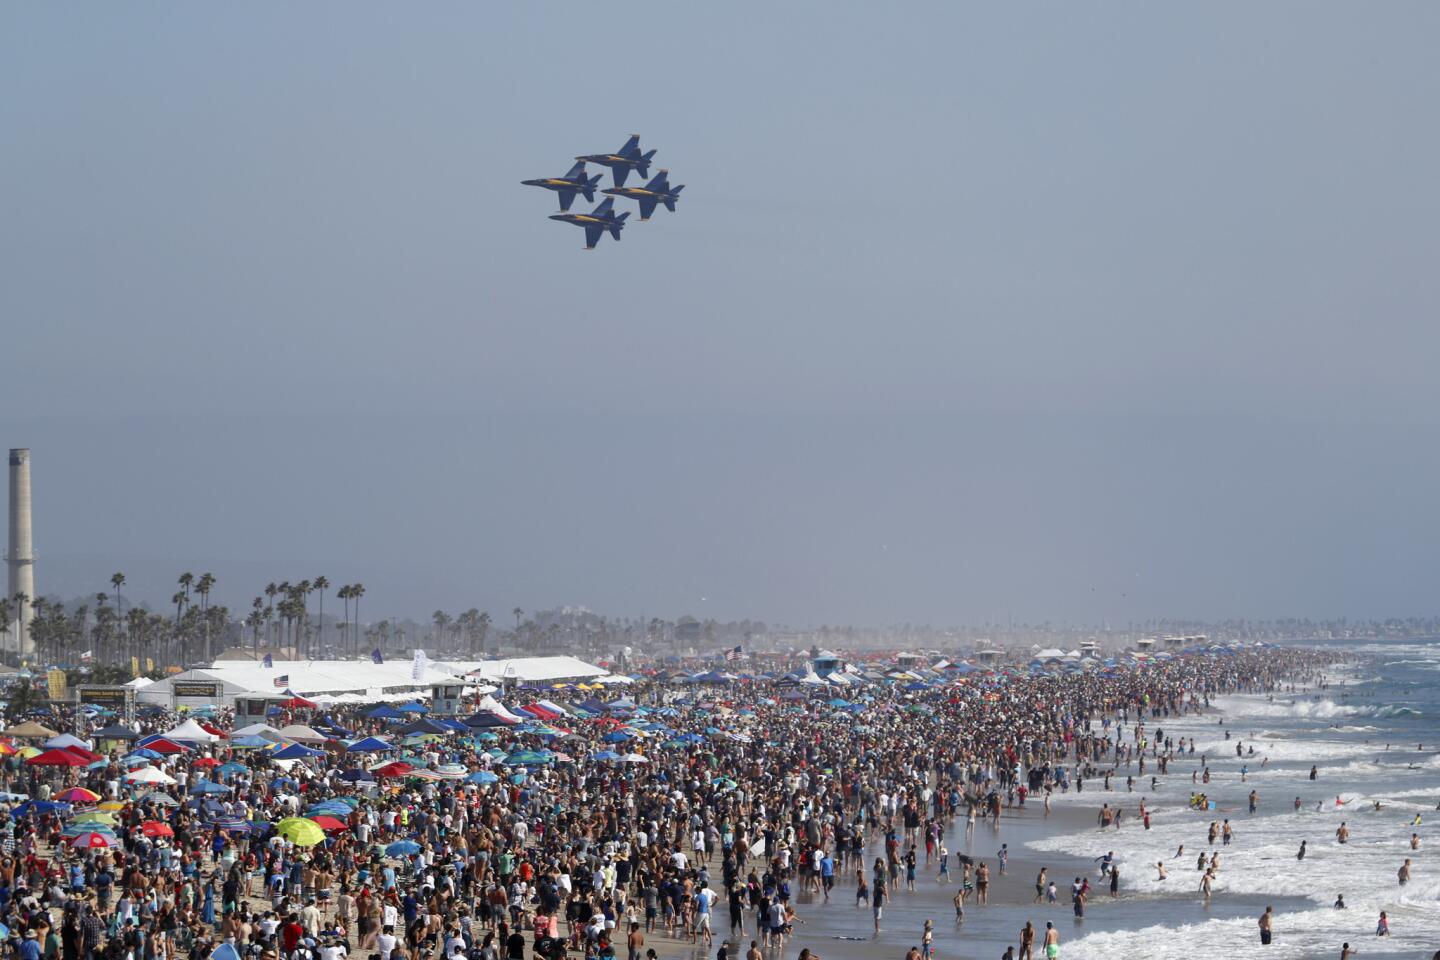 A large crowd lines the shore as the U.S. Navy Blue Angels fly in formation in the second annual Breitling Huntington Beach Air Show, which also featured the Royal Canadian Air Force Snowbirds, a FedEx 757 flyby and other performances.